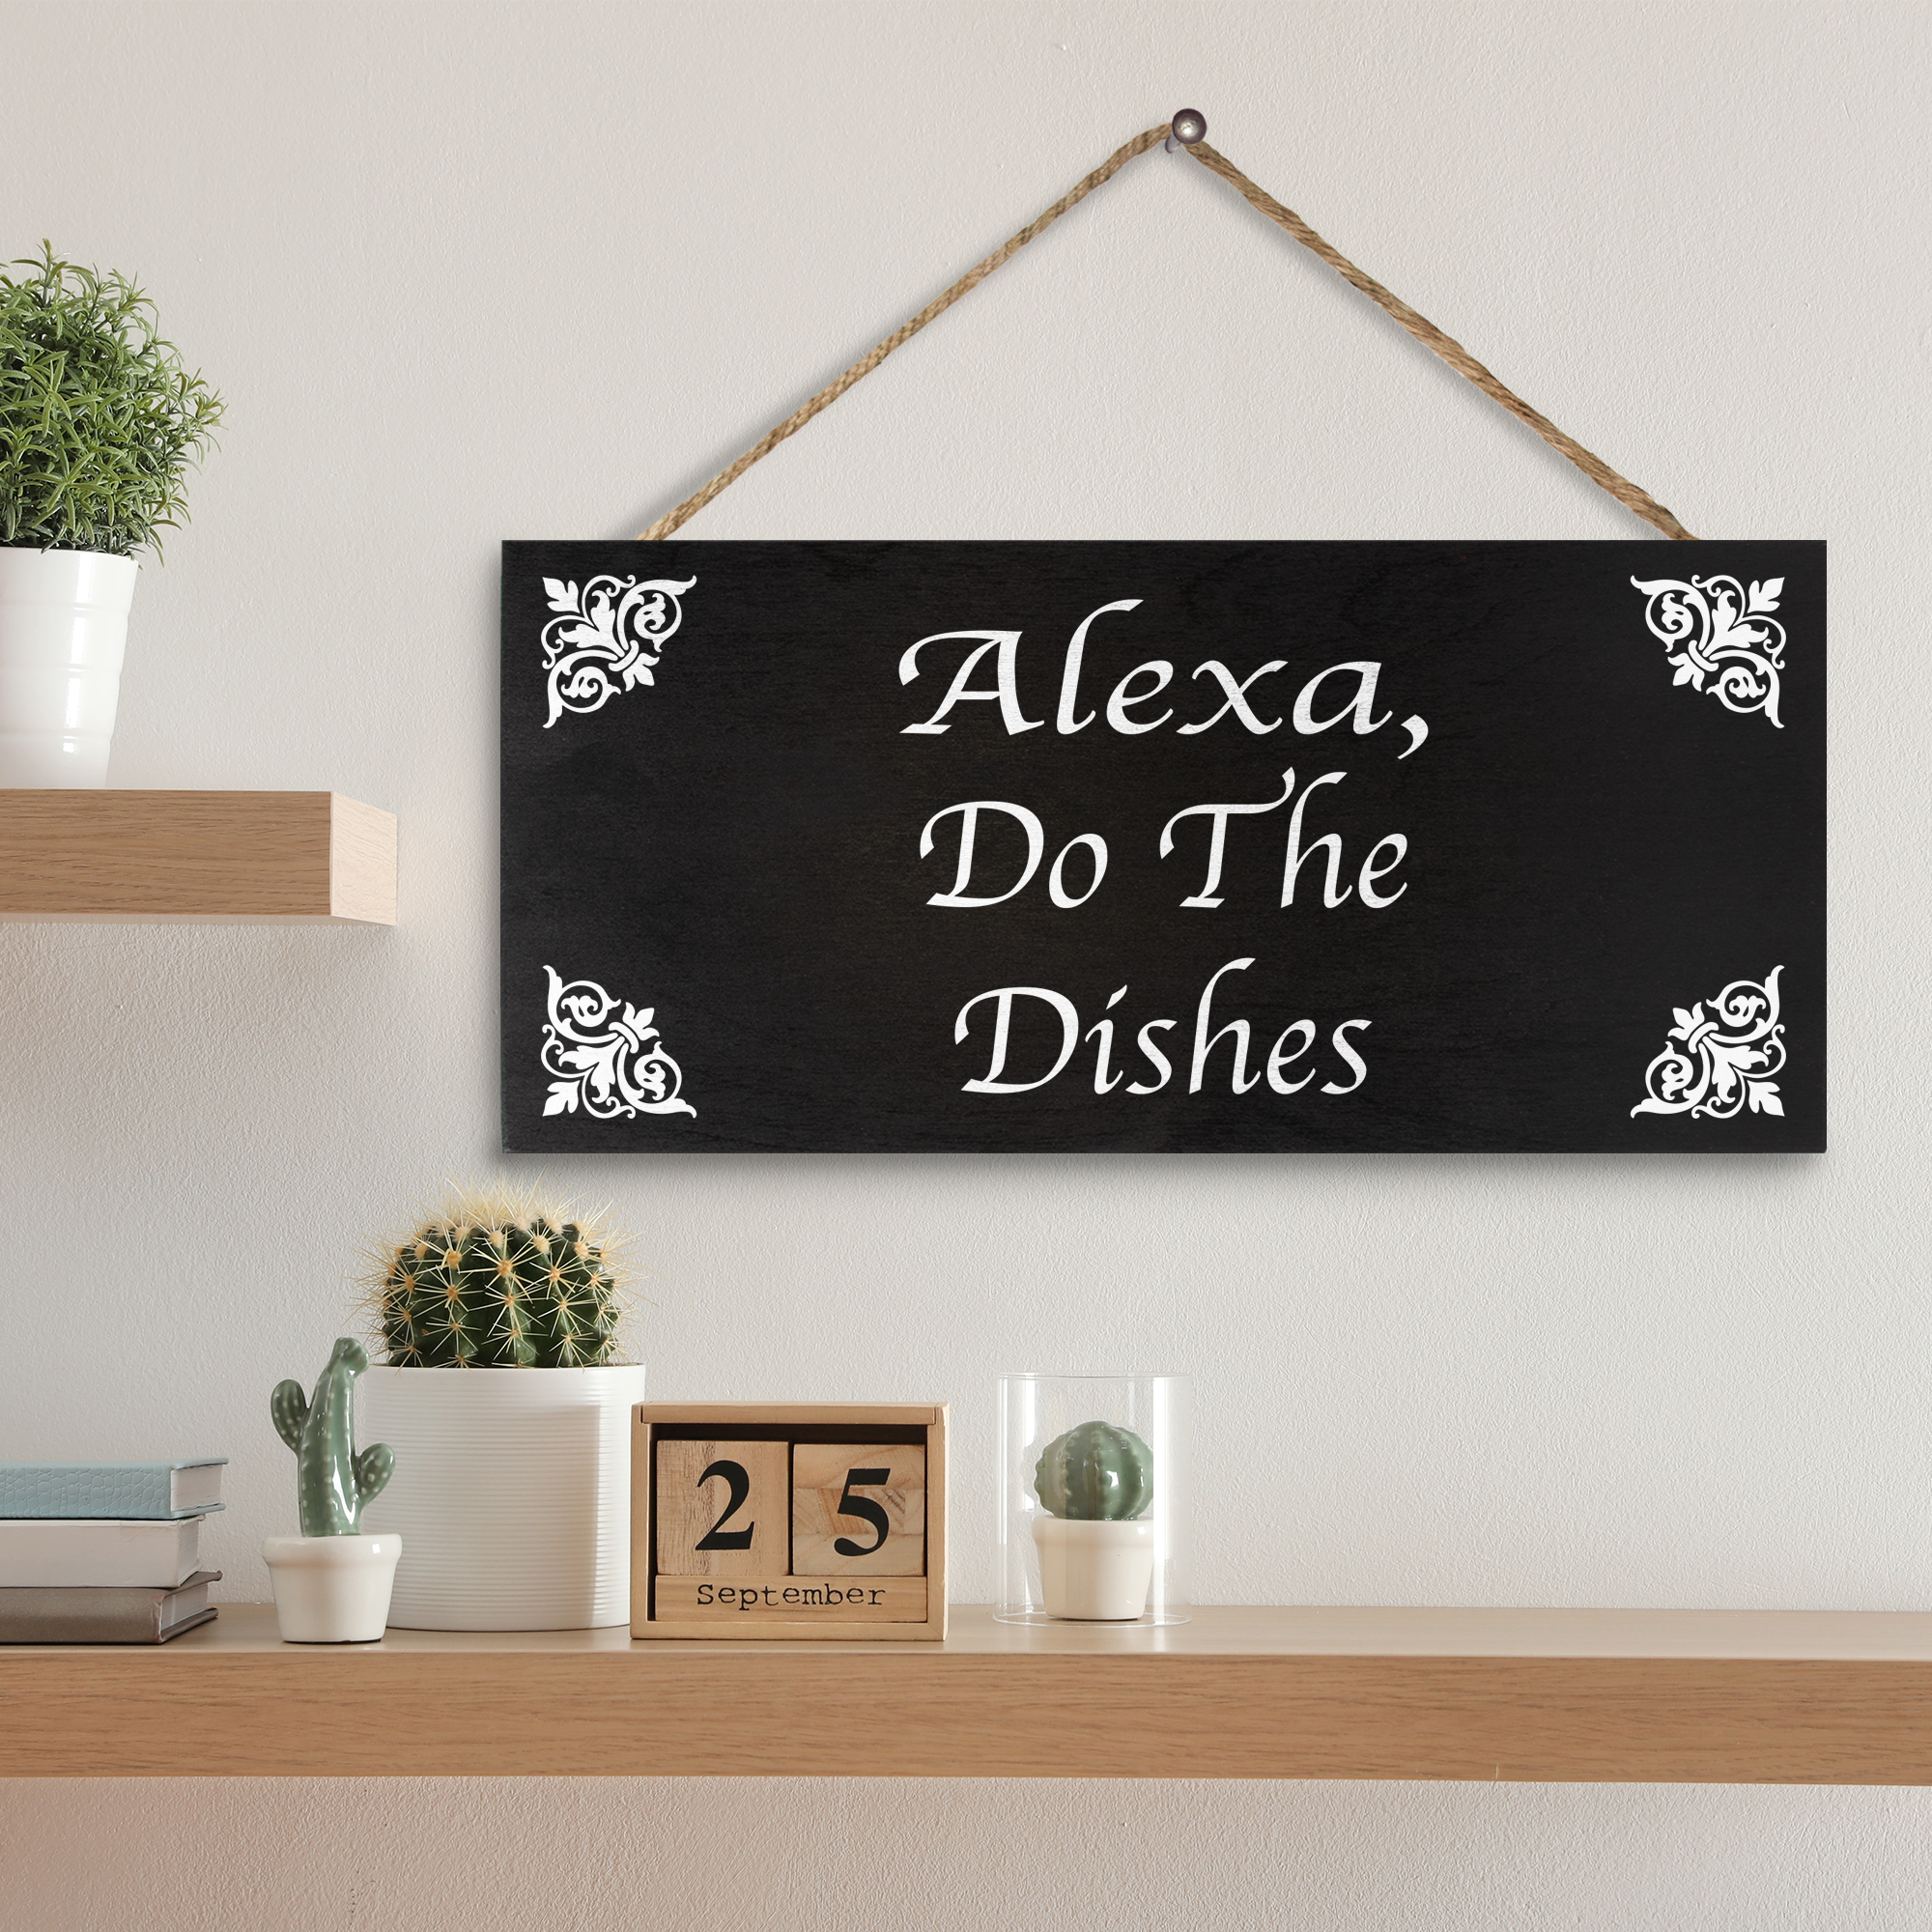 JennyGems Funny Kitchen Signs, Modern Farmhouse Kitchen Decorations, Alexa  Do the Dishes Hanging Wood Sign, Kitchen Decor, Funny Kitchen Plaque, Fun  Humorous Novelty Kitchen Wall Art 